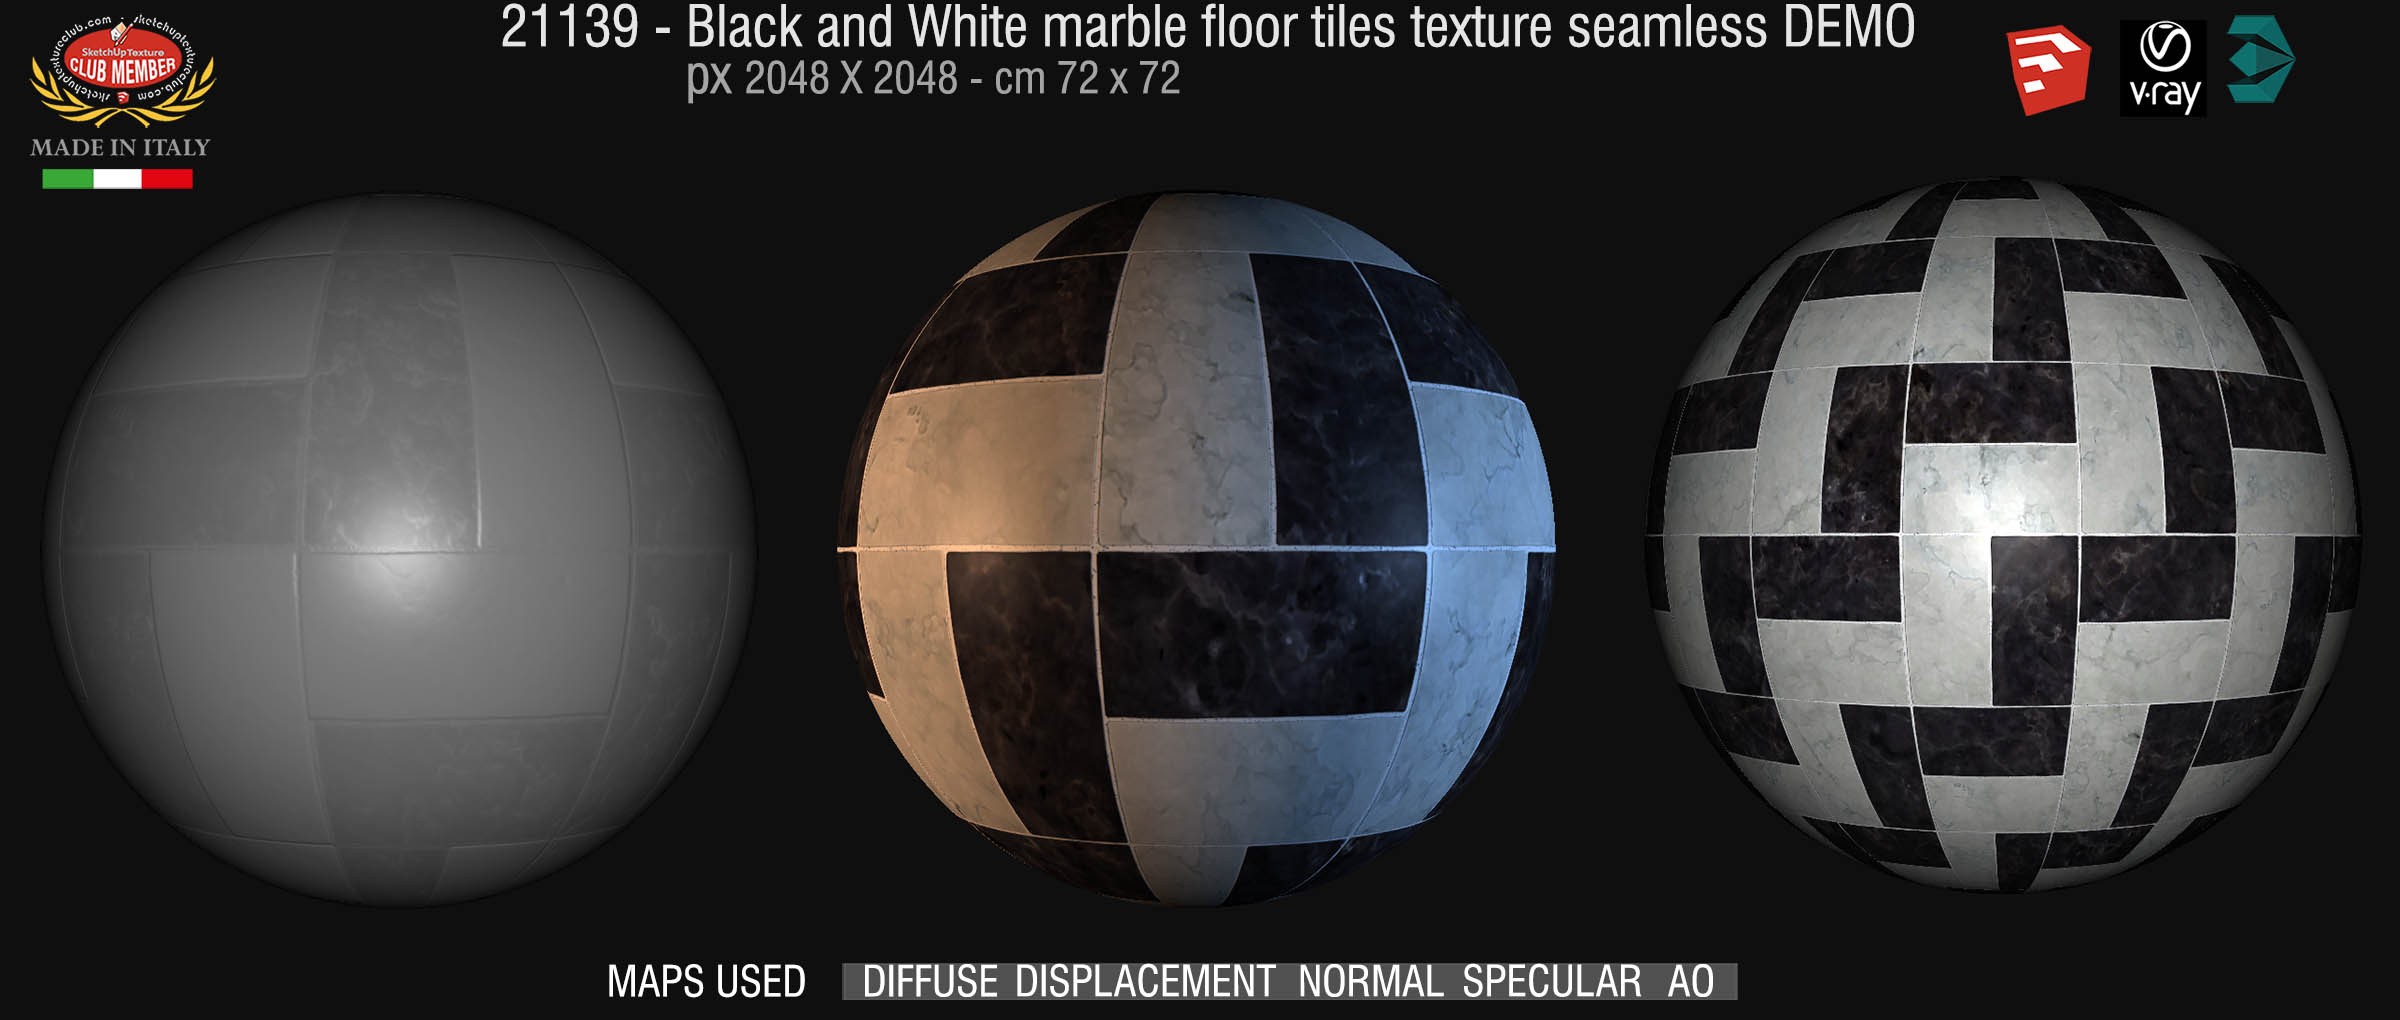 21139 Black and white marble tile texture seamless + maps DEMO